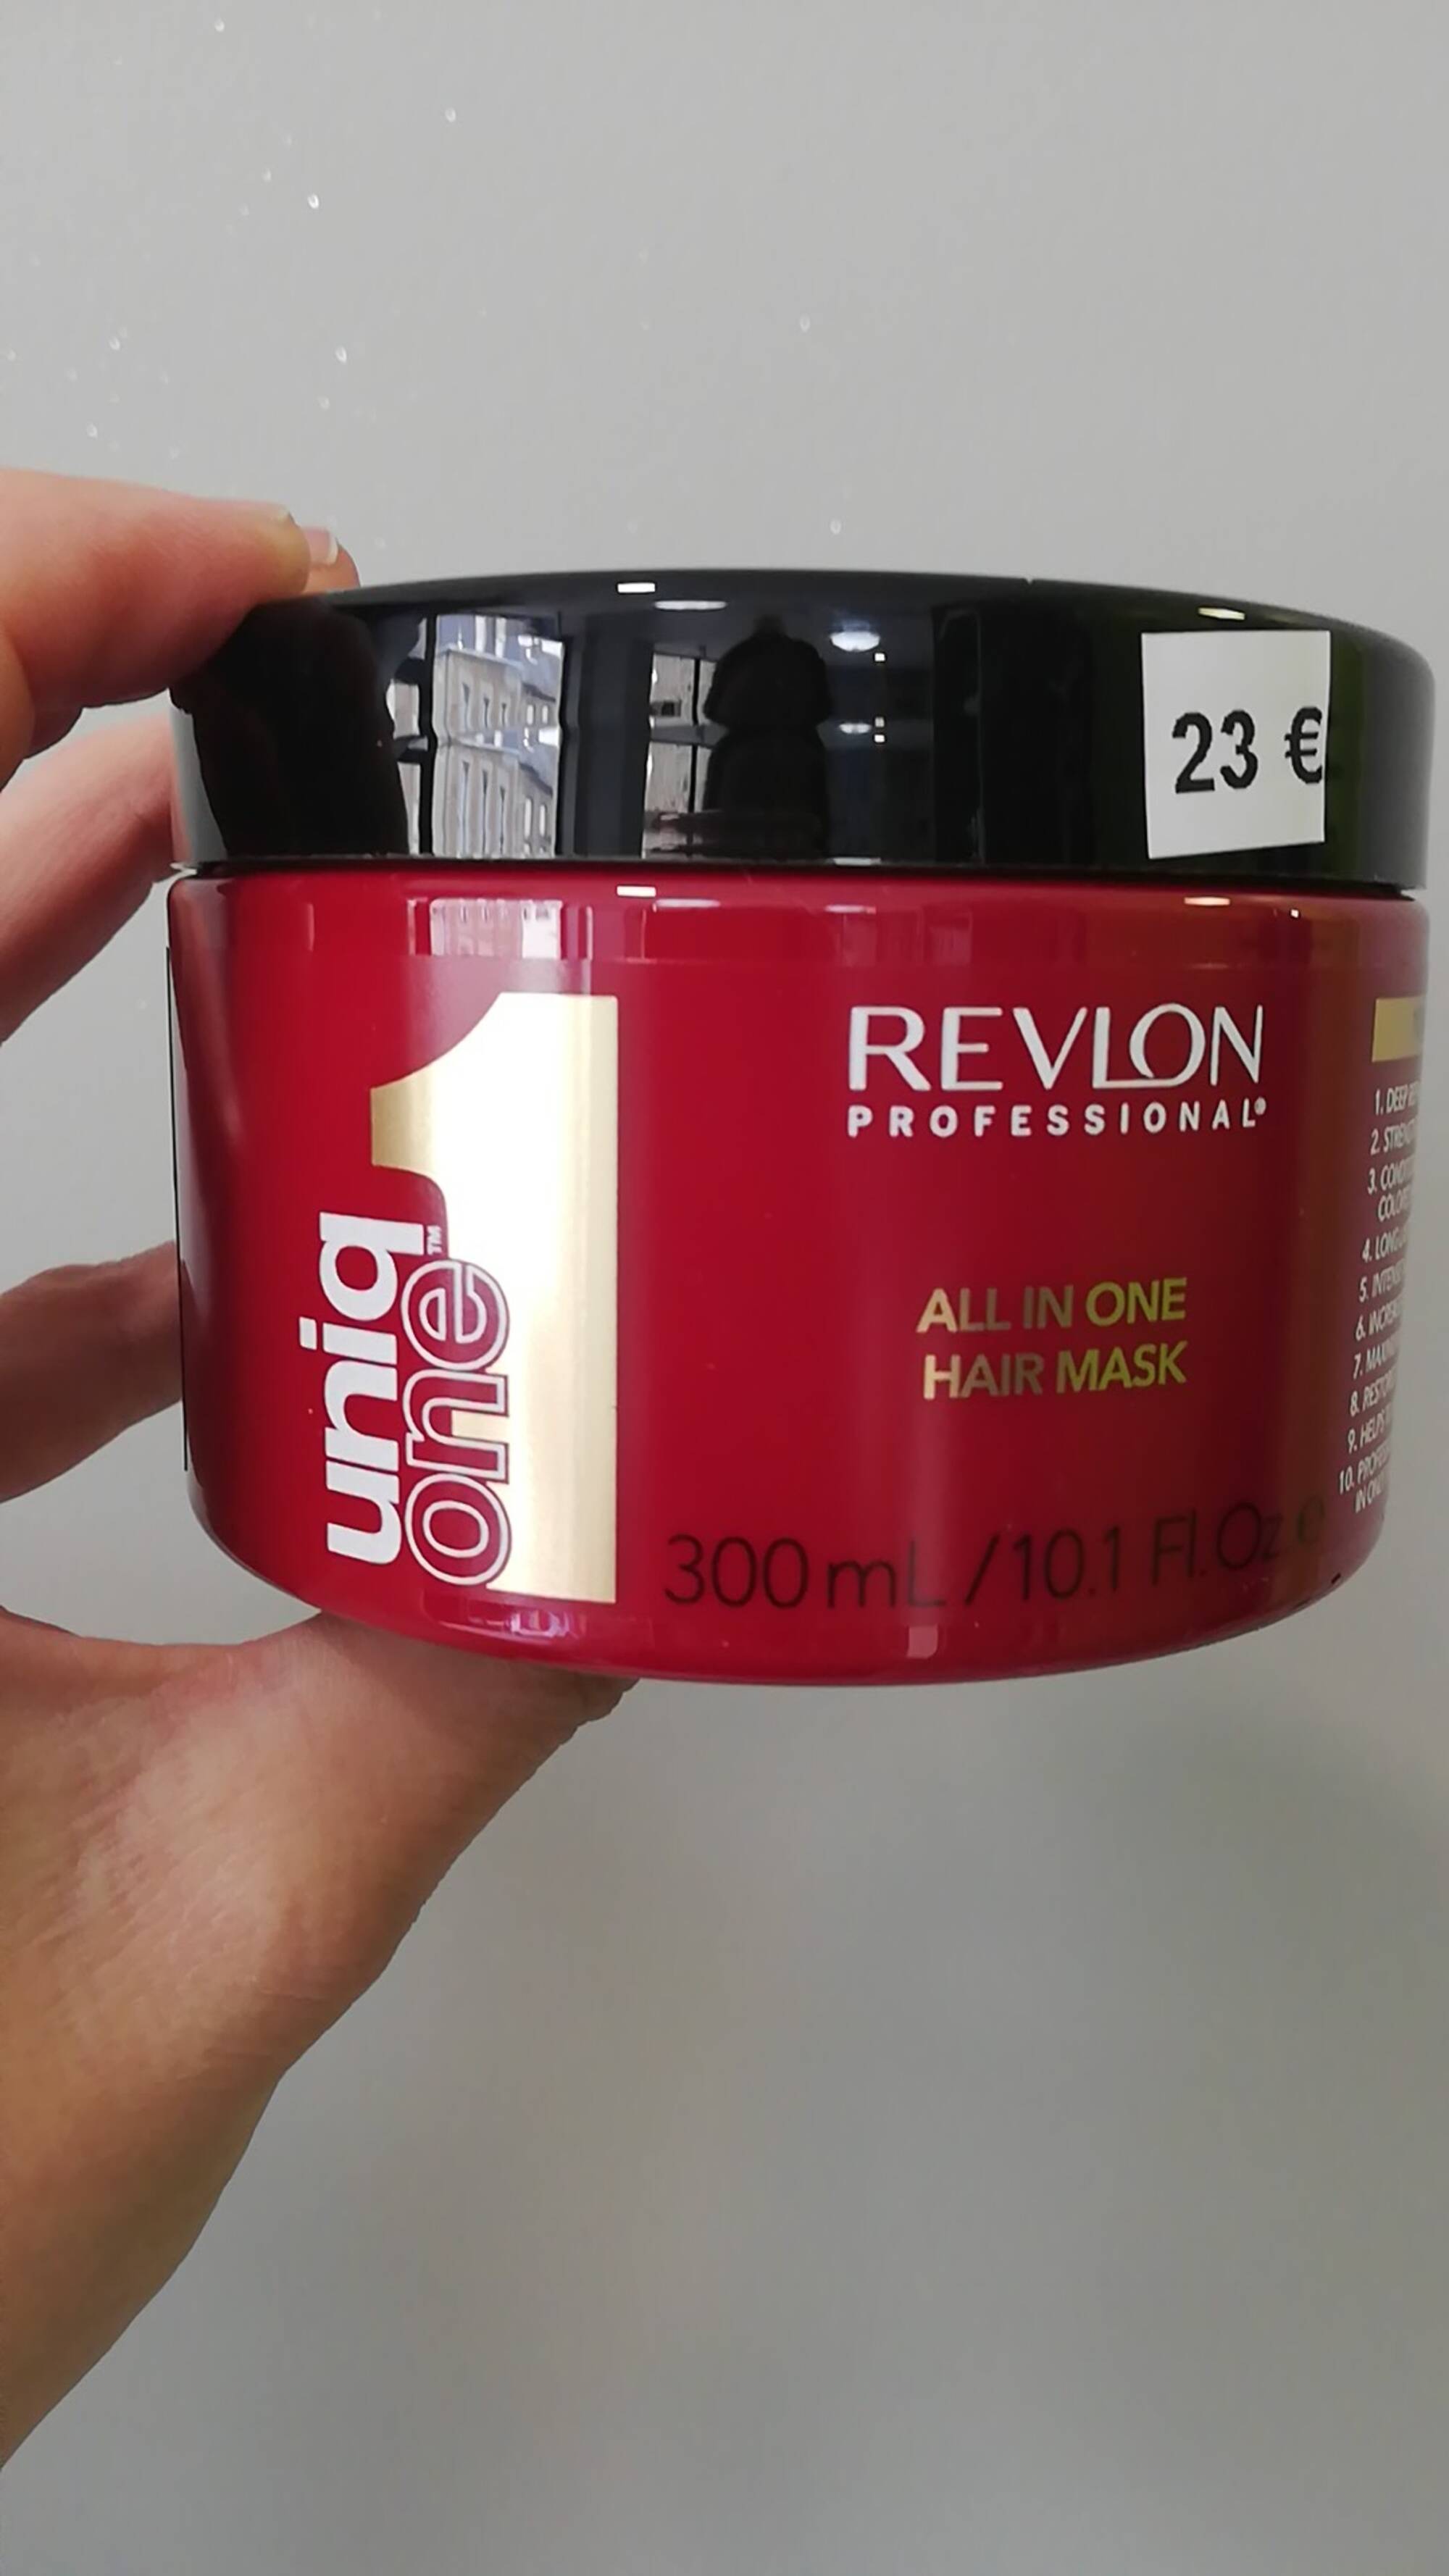 REVLON PROFESSIONAL - Uniq One - All in one hair mask